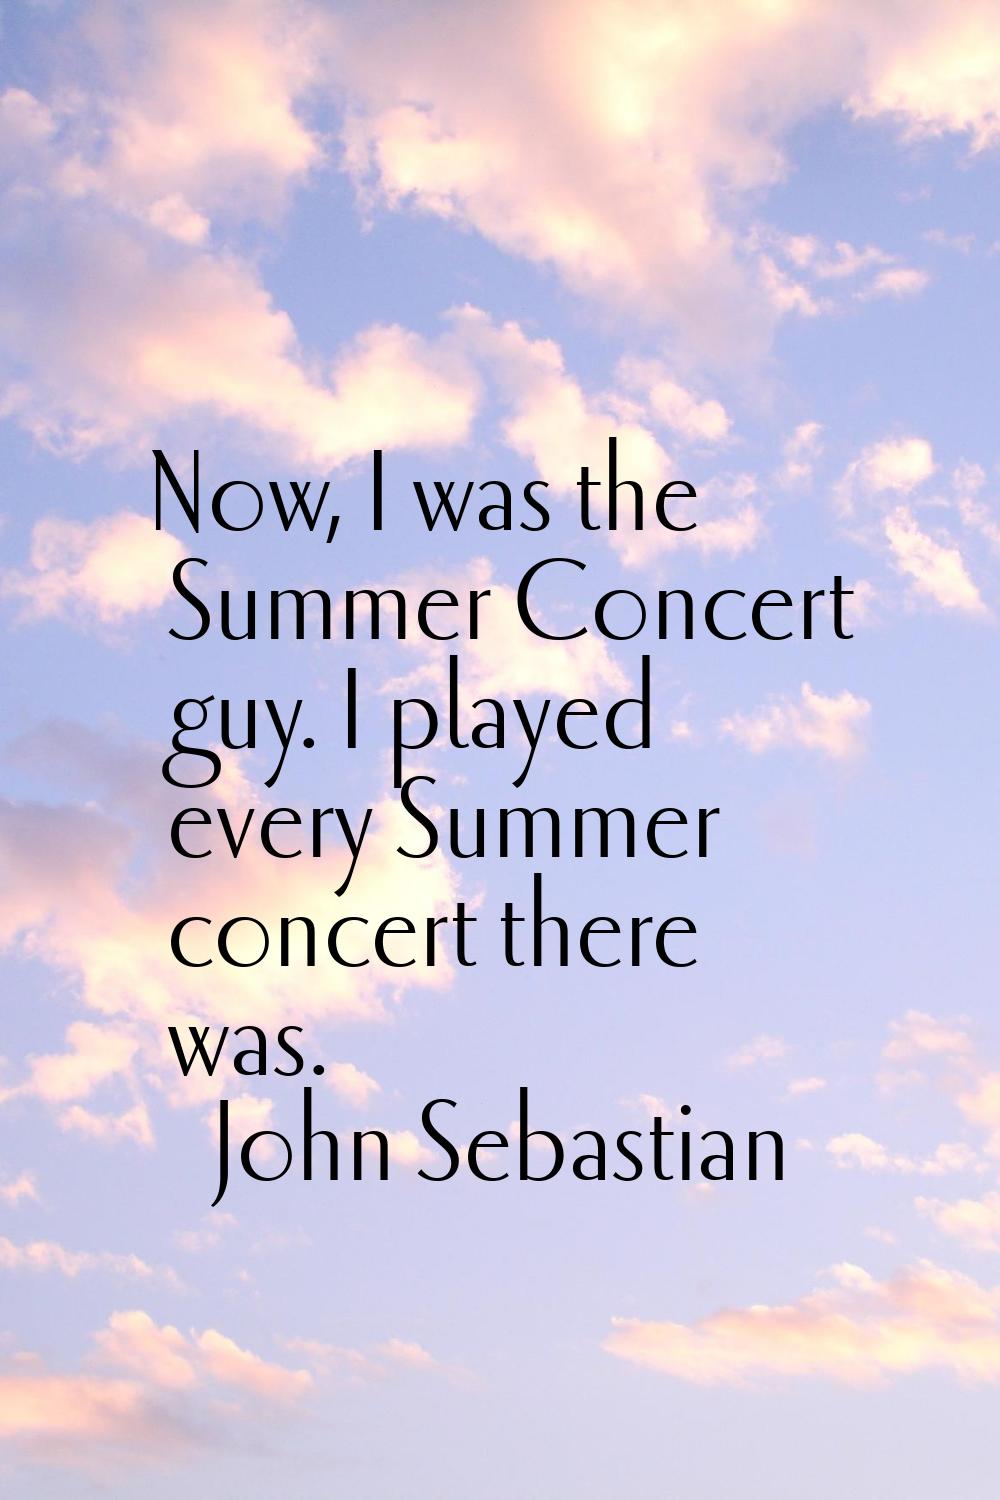 Now, I was the Summer Concert guy. I played every Summer concert there was.